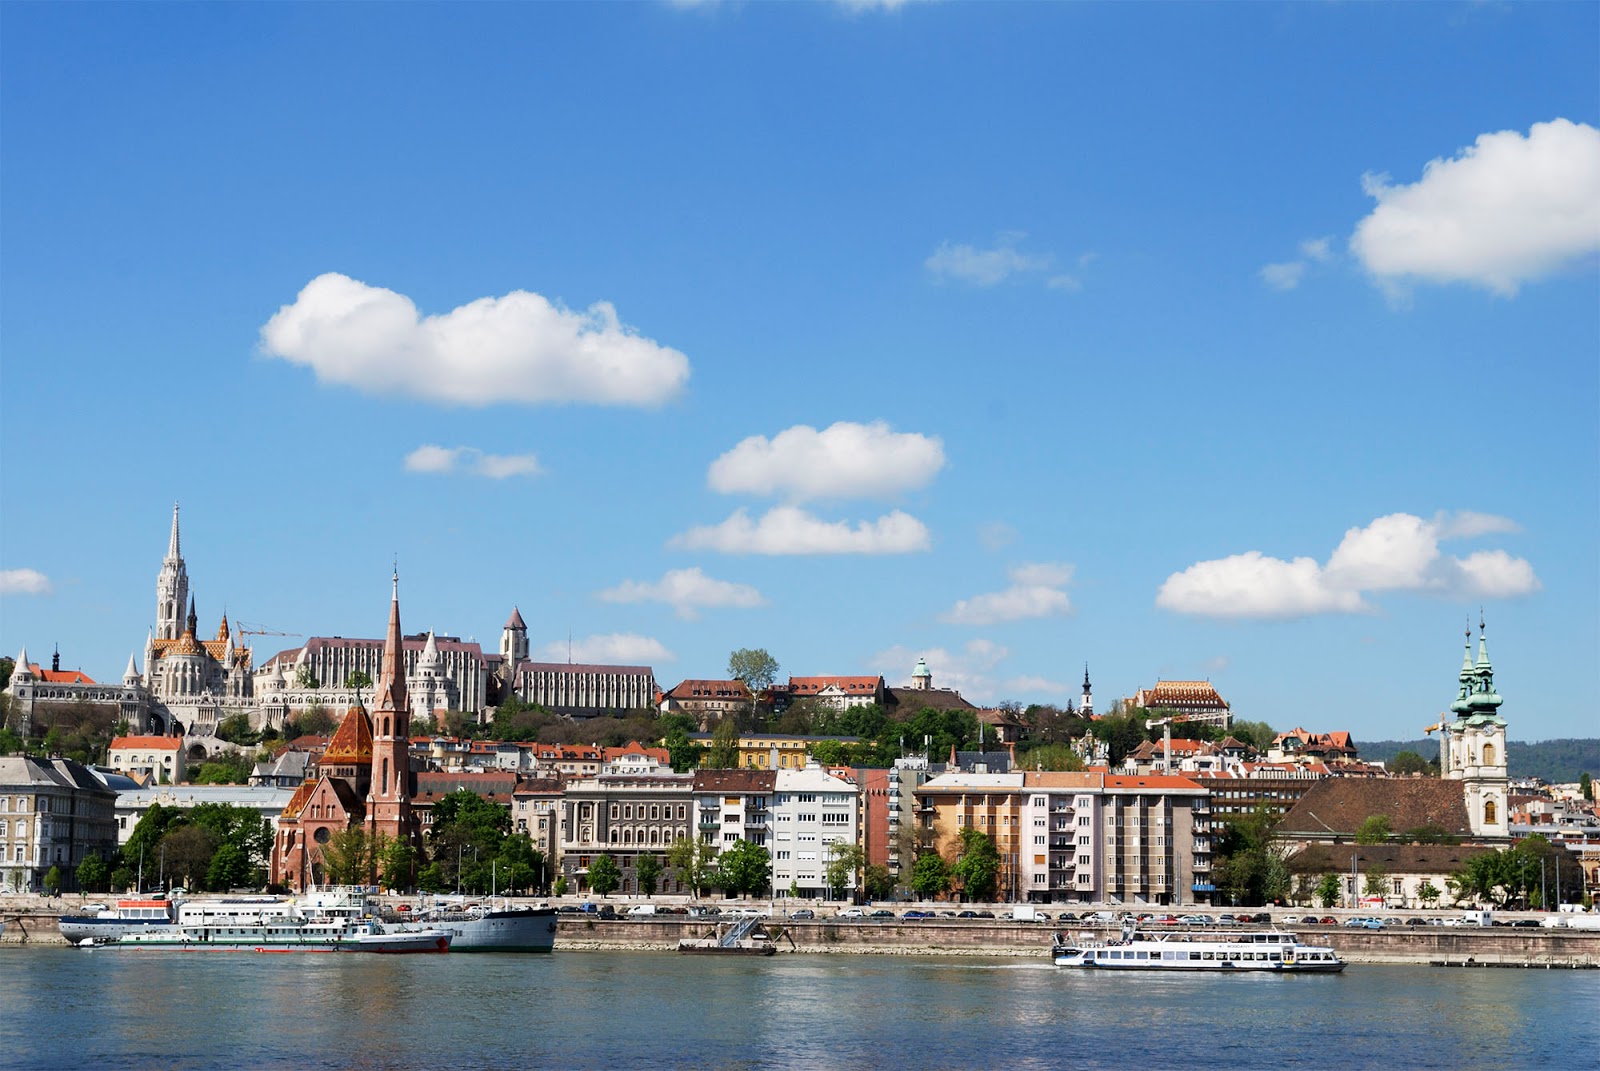 danube river views budapest guide itinerary instagram worthy spot sights landmarks hungary